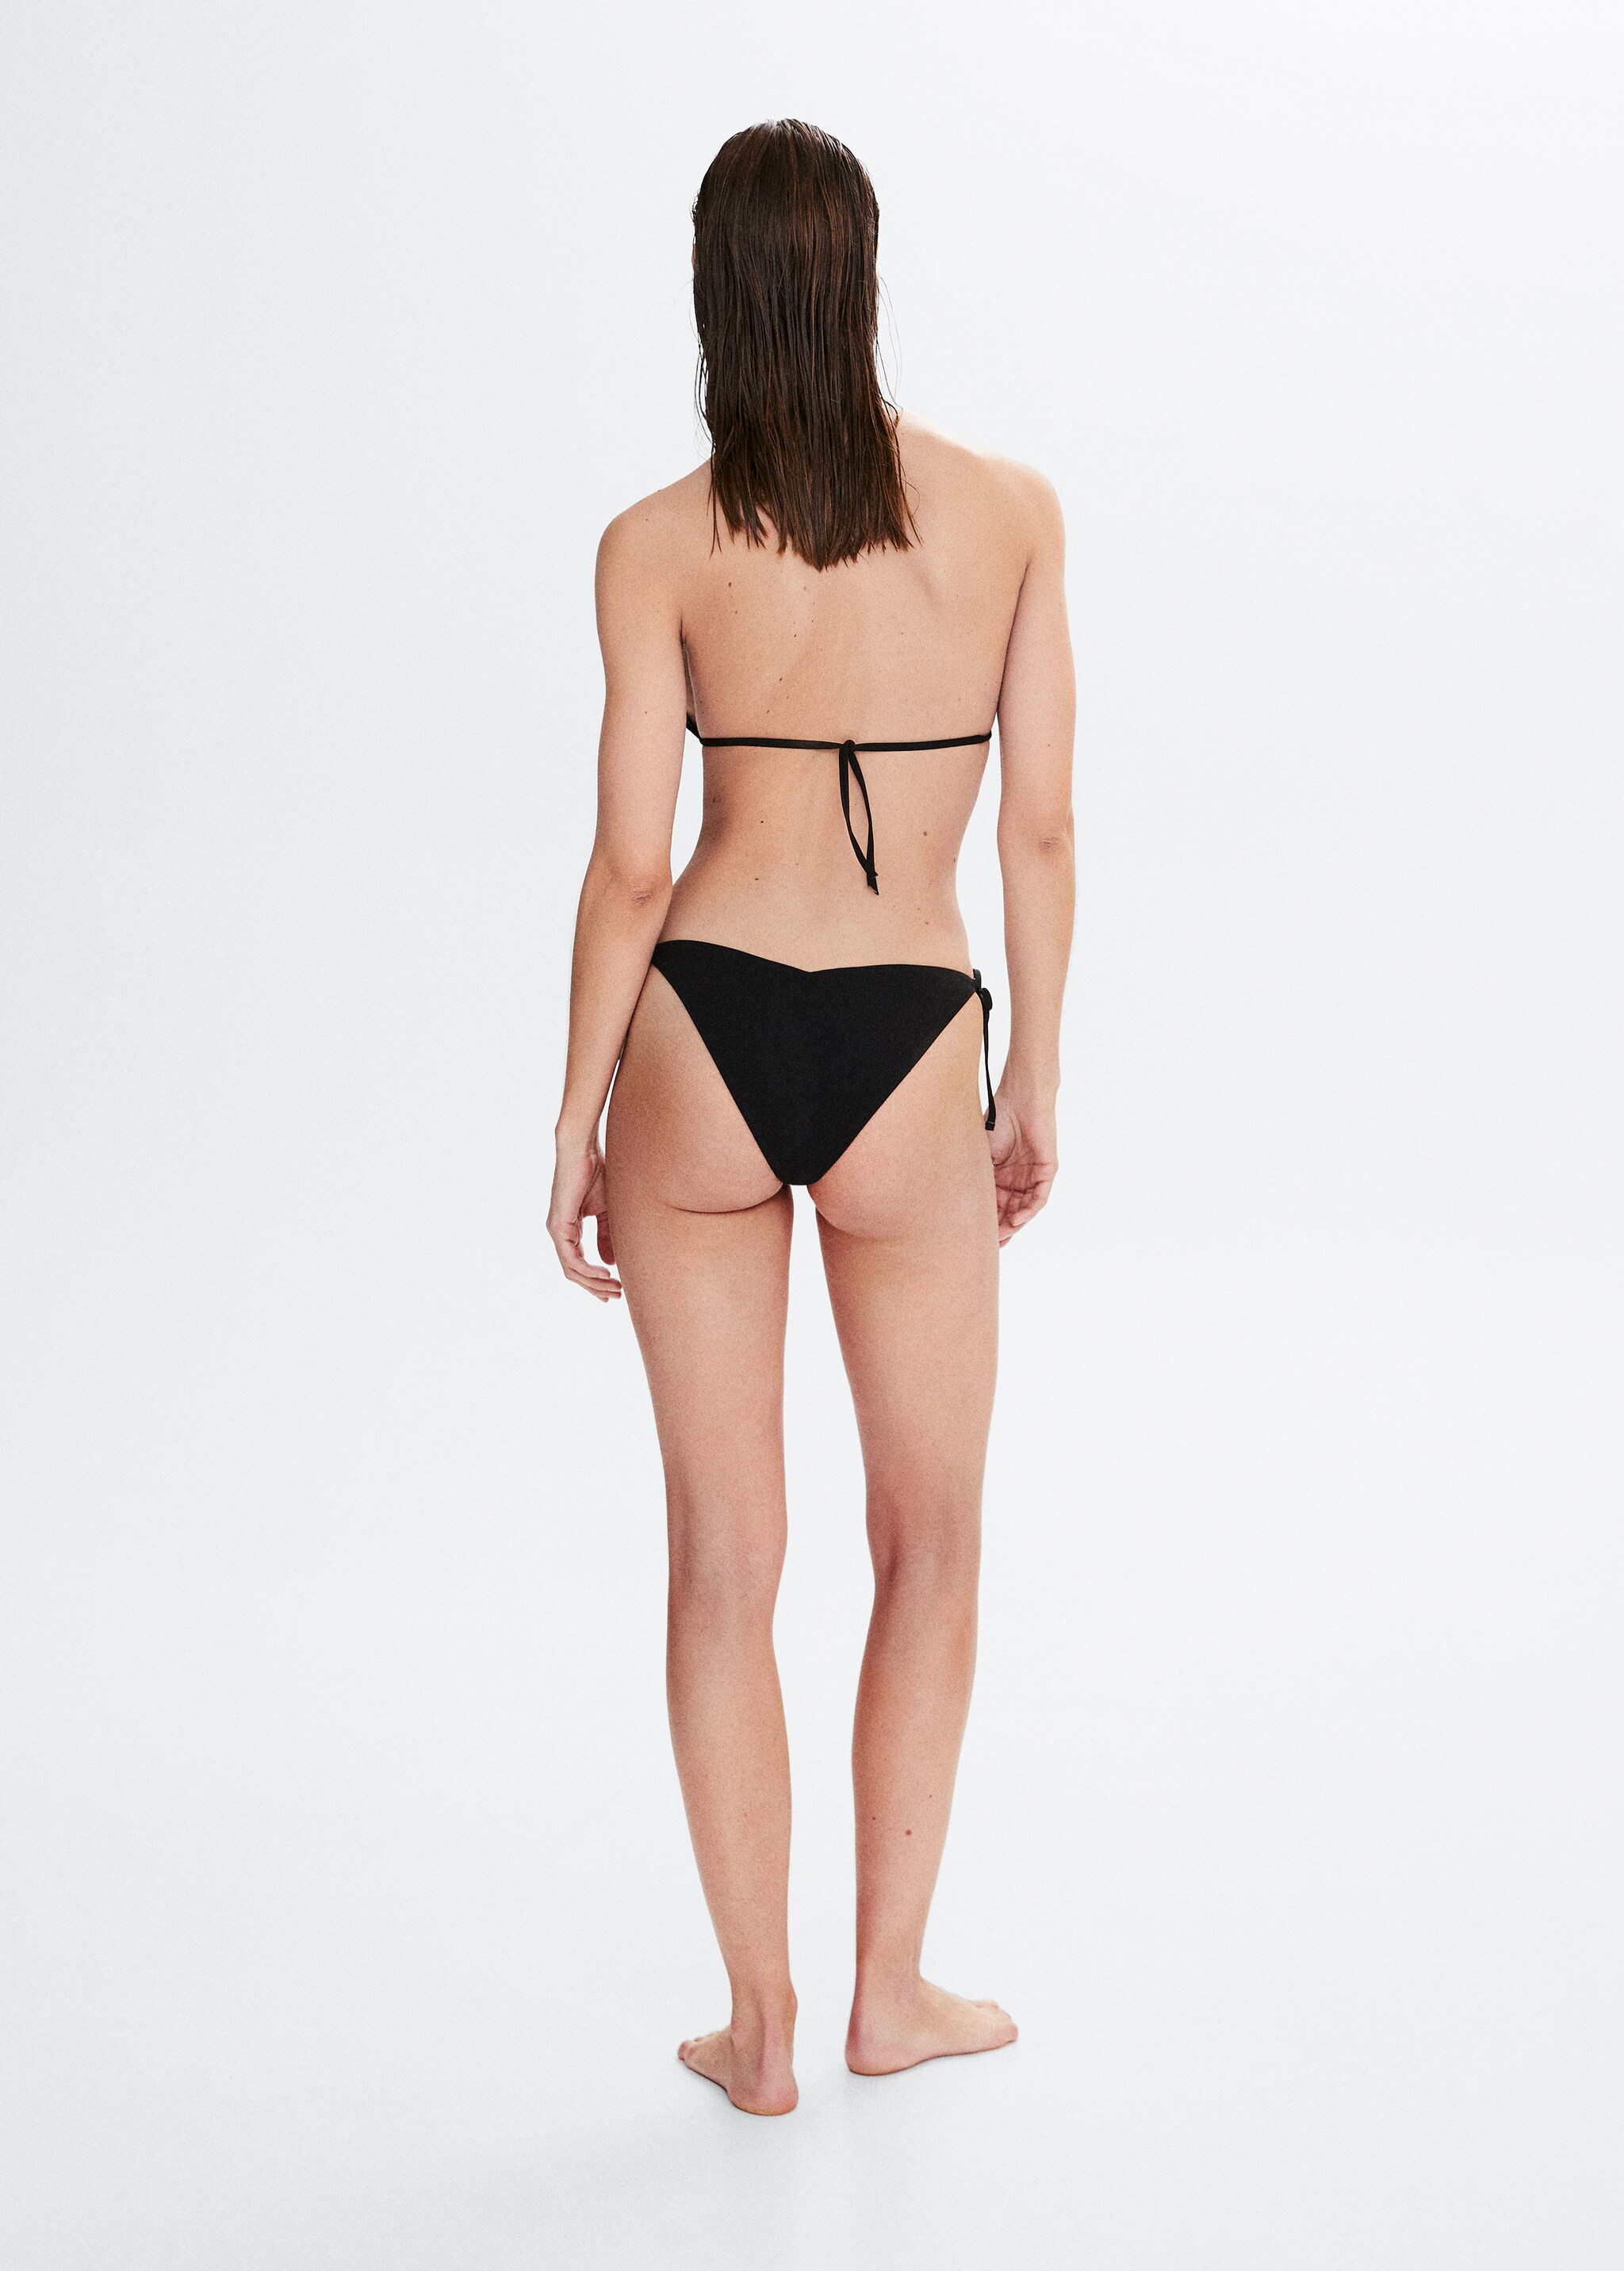 Classic bikini bottoms with bows - Reverse of the article